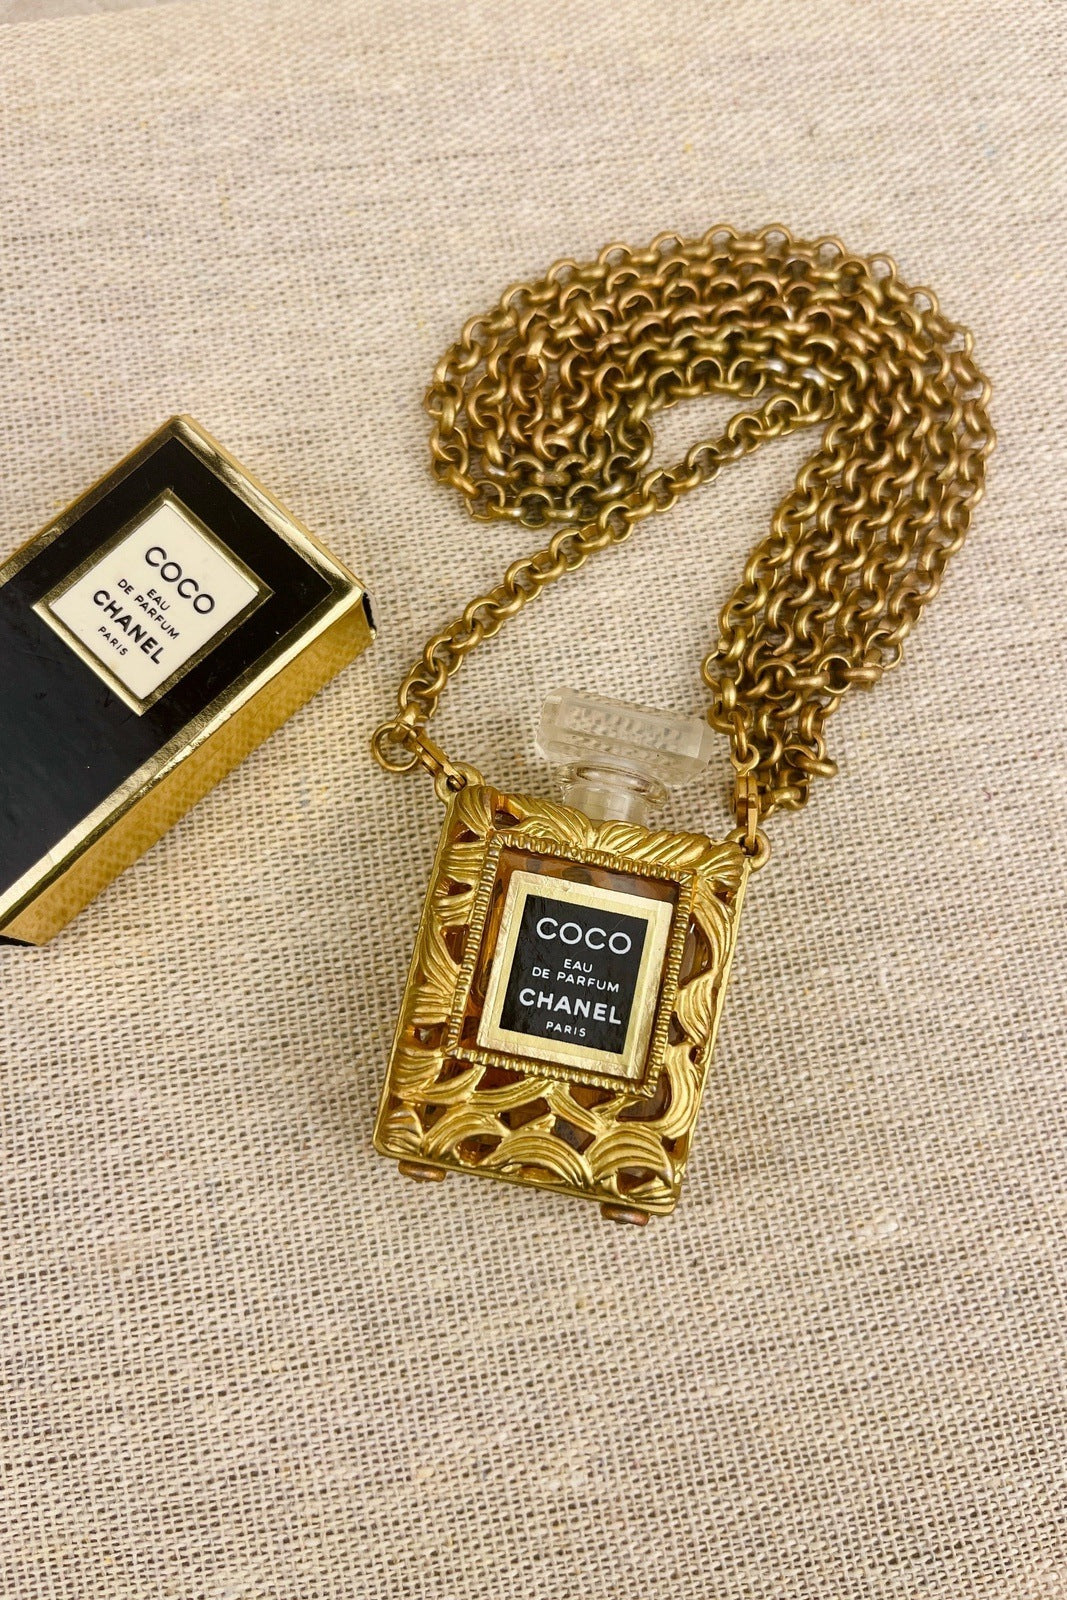 Chanel perfume case vintage necklace-CHANEL Perfume Bottle Gold Chain  Pendant Necklace-RELOVE DELUXE